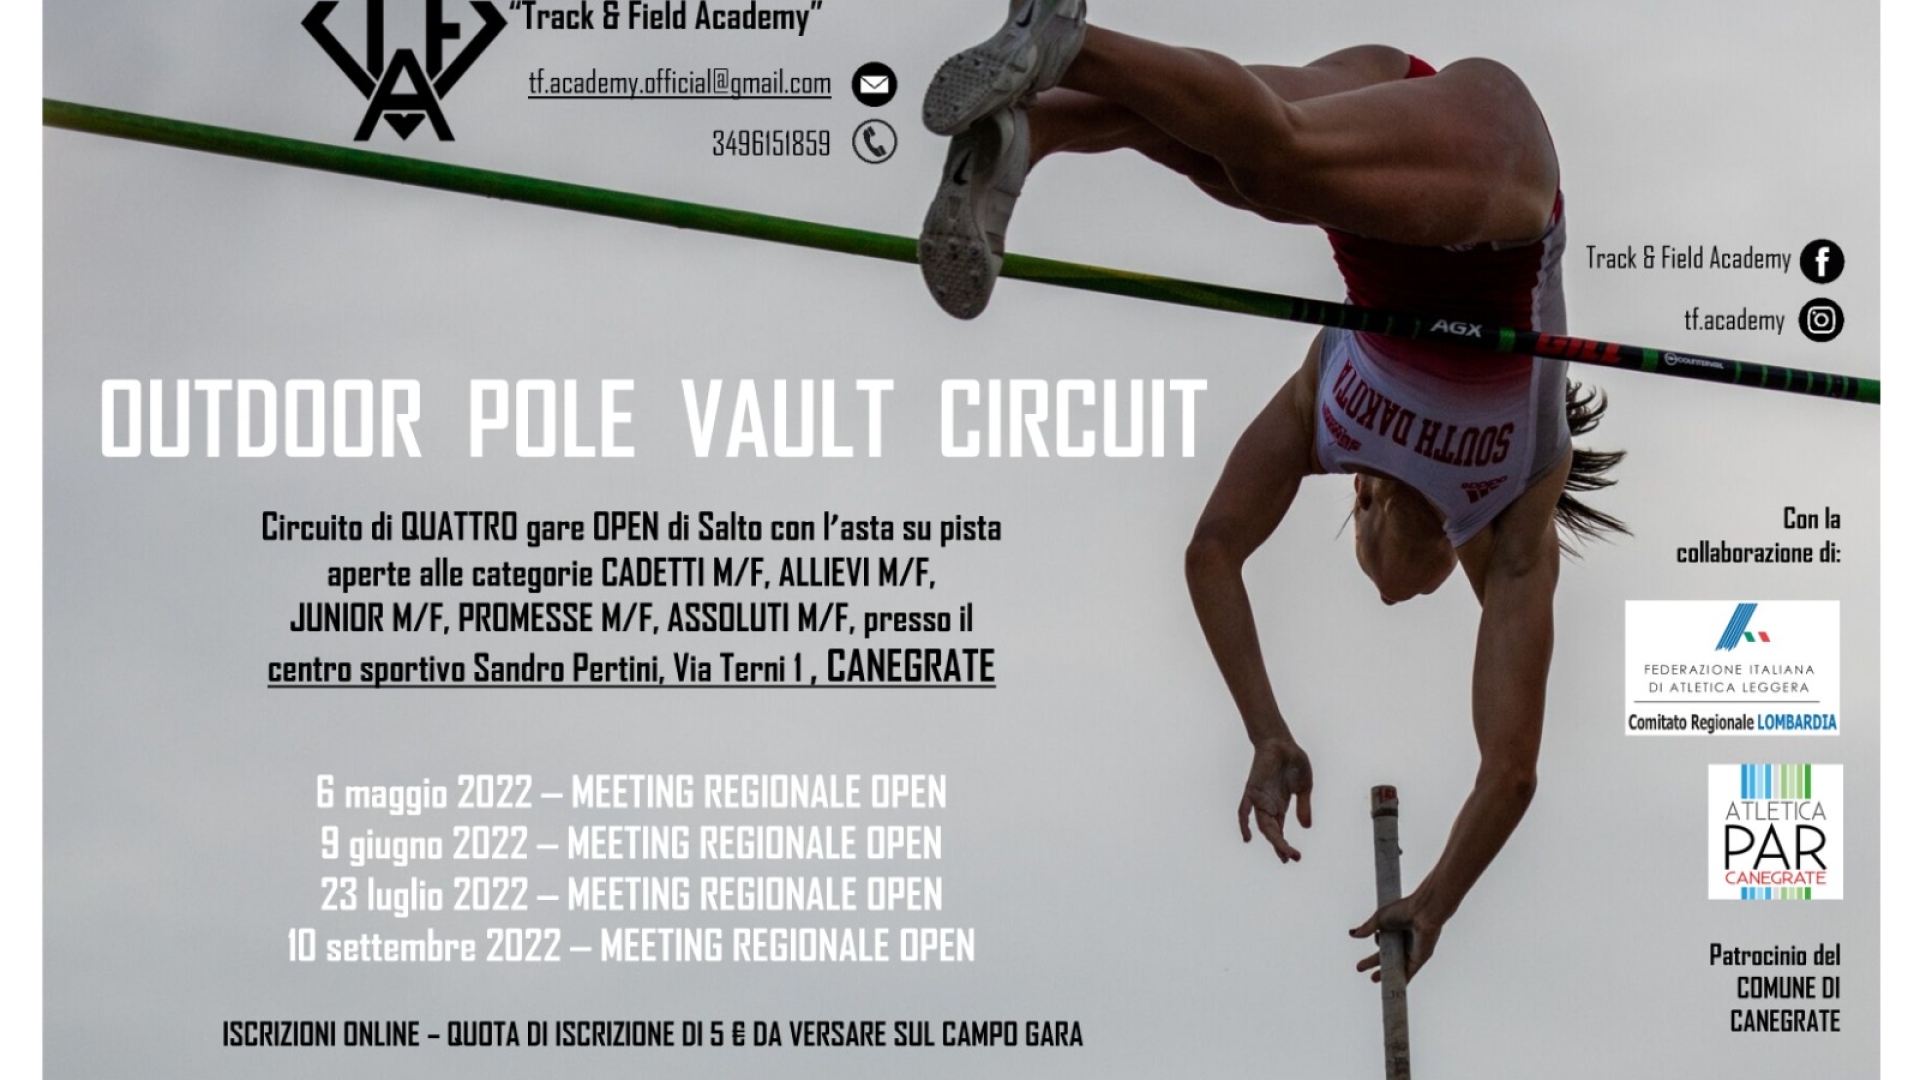 Outdoor Pole Vault Circuit: 5 Meeting a Canegrate